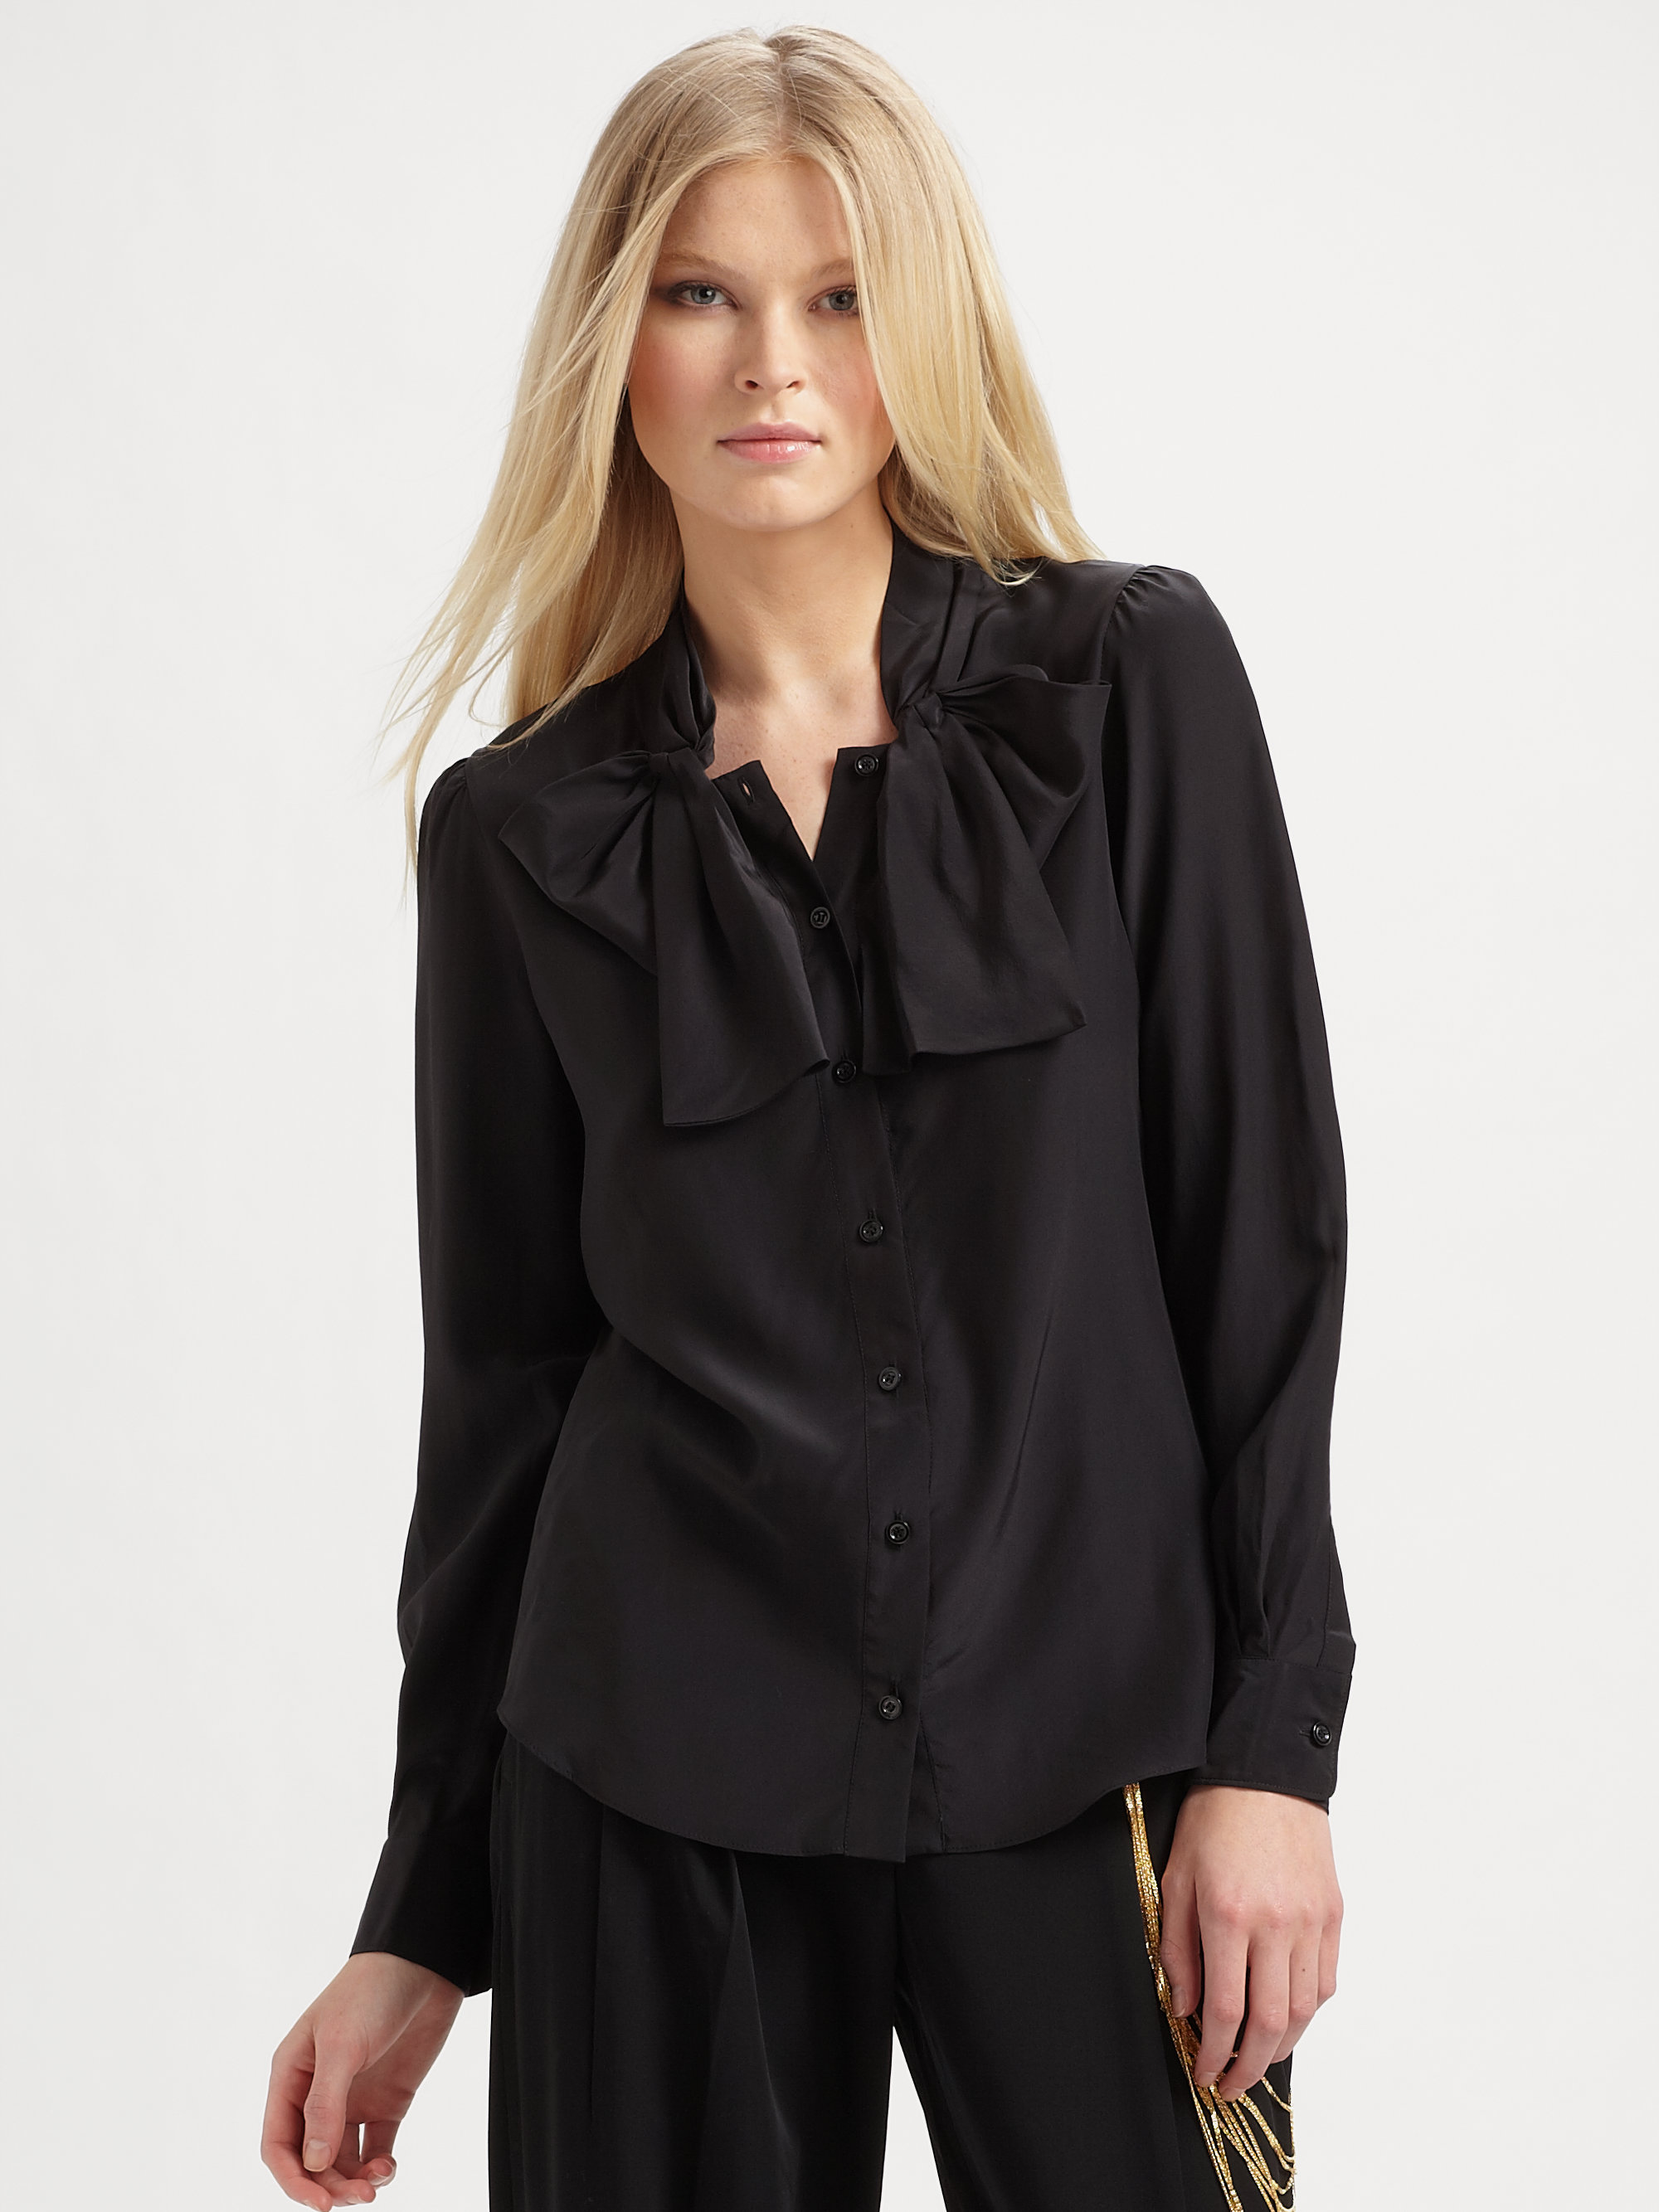 Moschino Silk Bow Neck Blouse in Black | Lyst